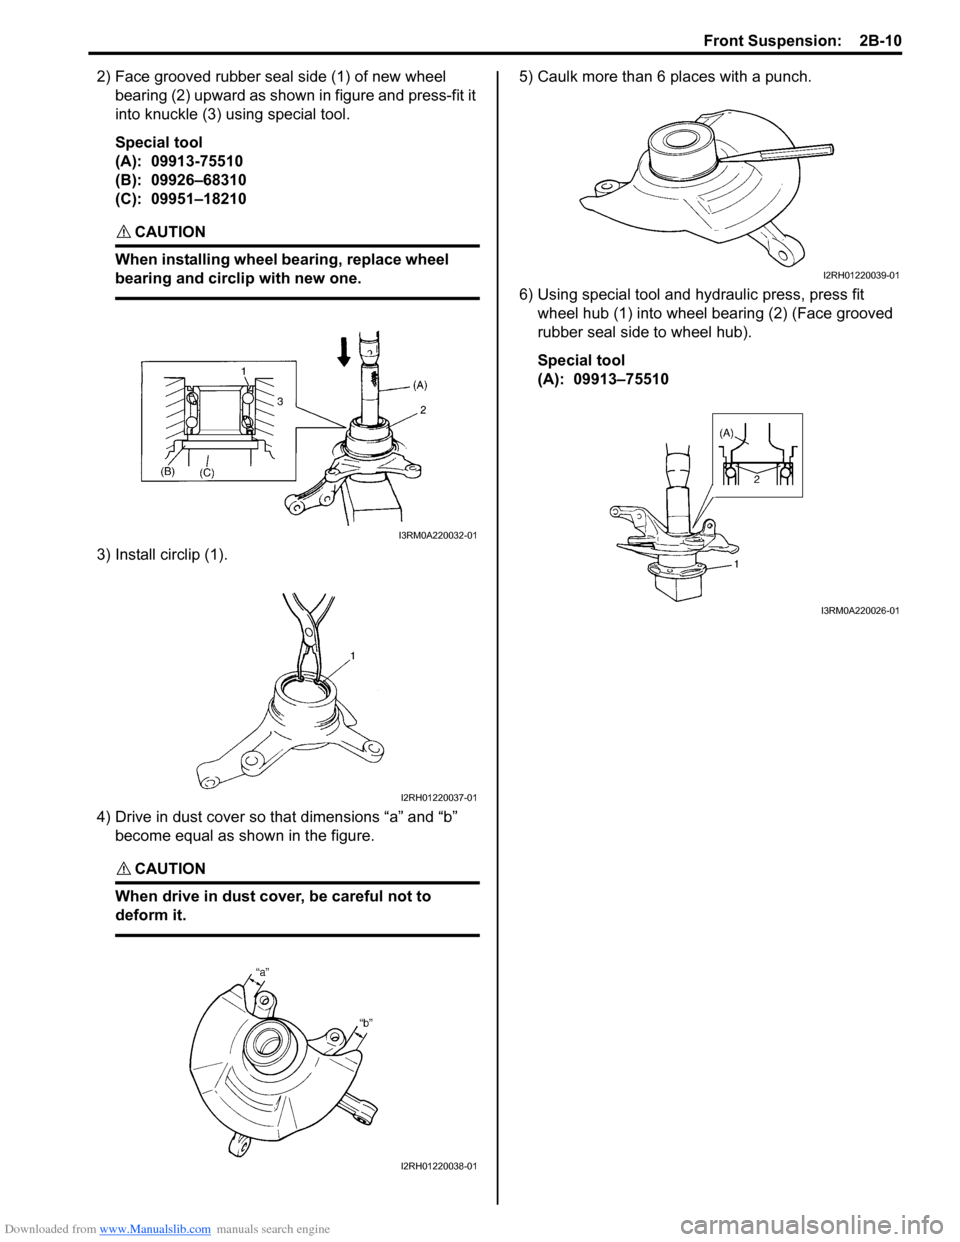 SUZUKI SWIFT 2008 2.G Service Workshop Manual Downloaded from www.Manualslib.com manuals search engine Front Suspension:  2B-10
2) Face grooved rubber seal side (1) of new wheel bearing (2) upward as shown in figure and press-fit it 
into knuckle